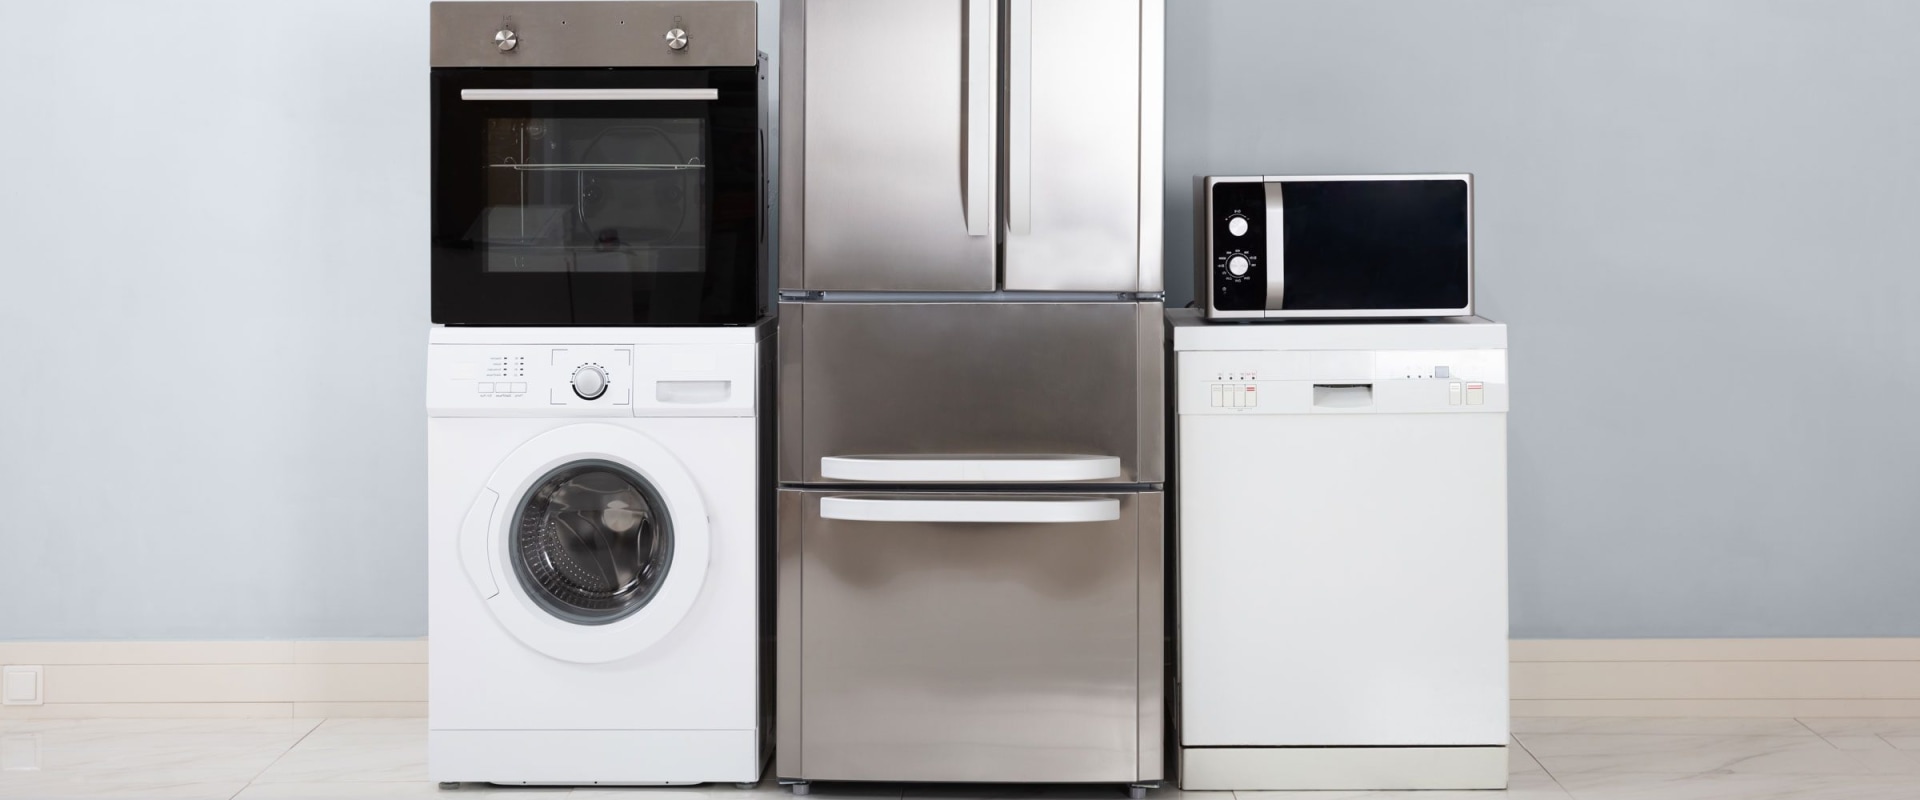 What is the most important electrical appliance?